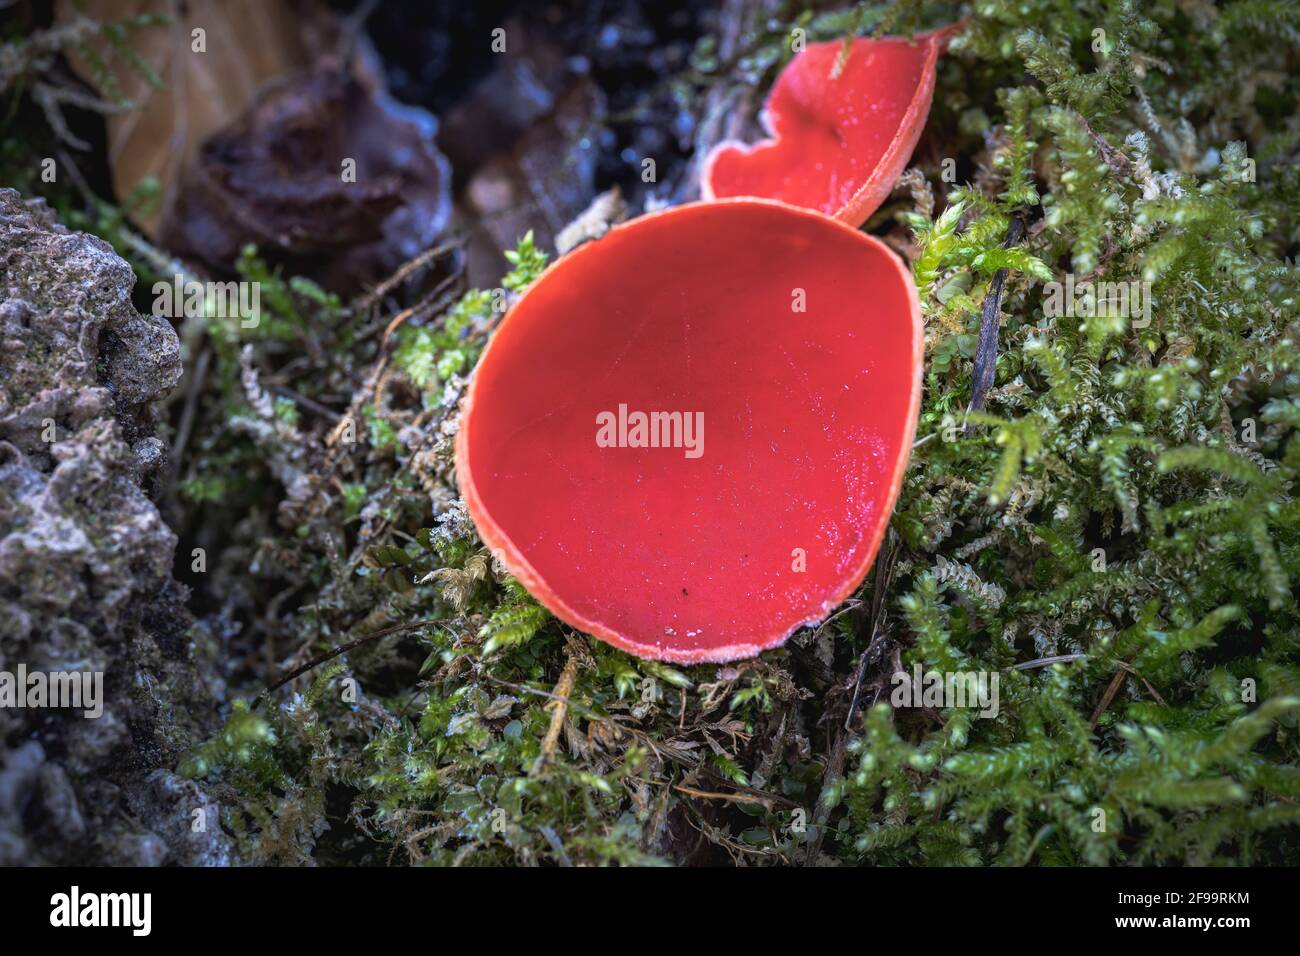 Scarlet cup cup, Sarcoscypha coccinea, mushroom, forest, nature, Swabian Alb, Baden-Wuerttemberg, Germany, Europe Stock Photo